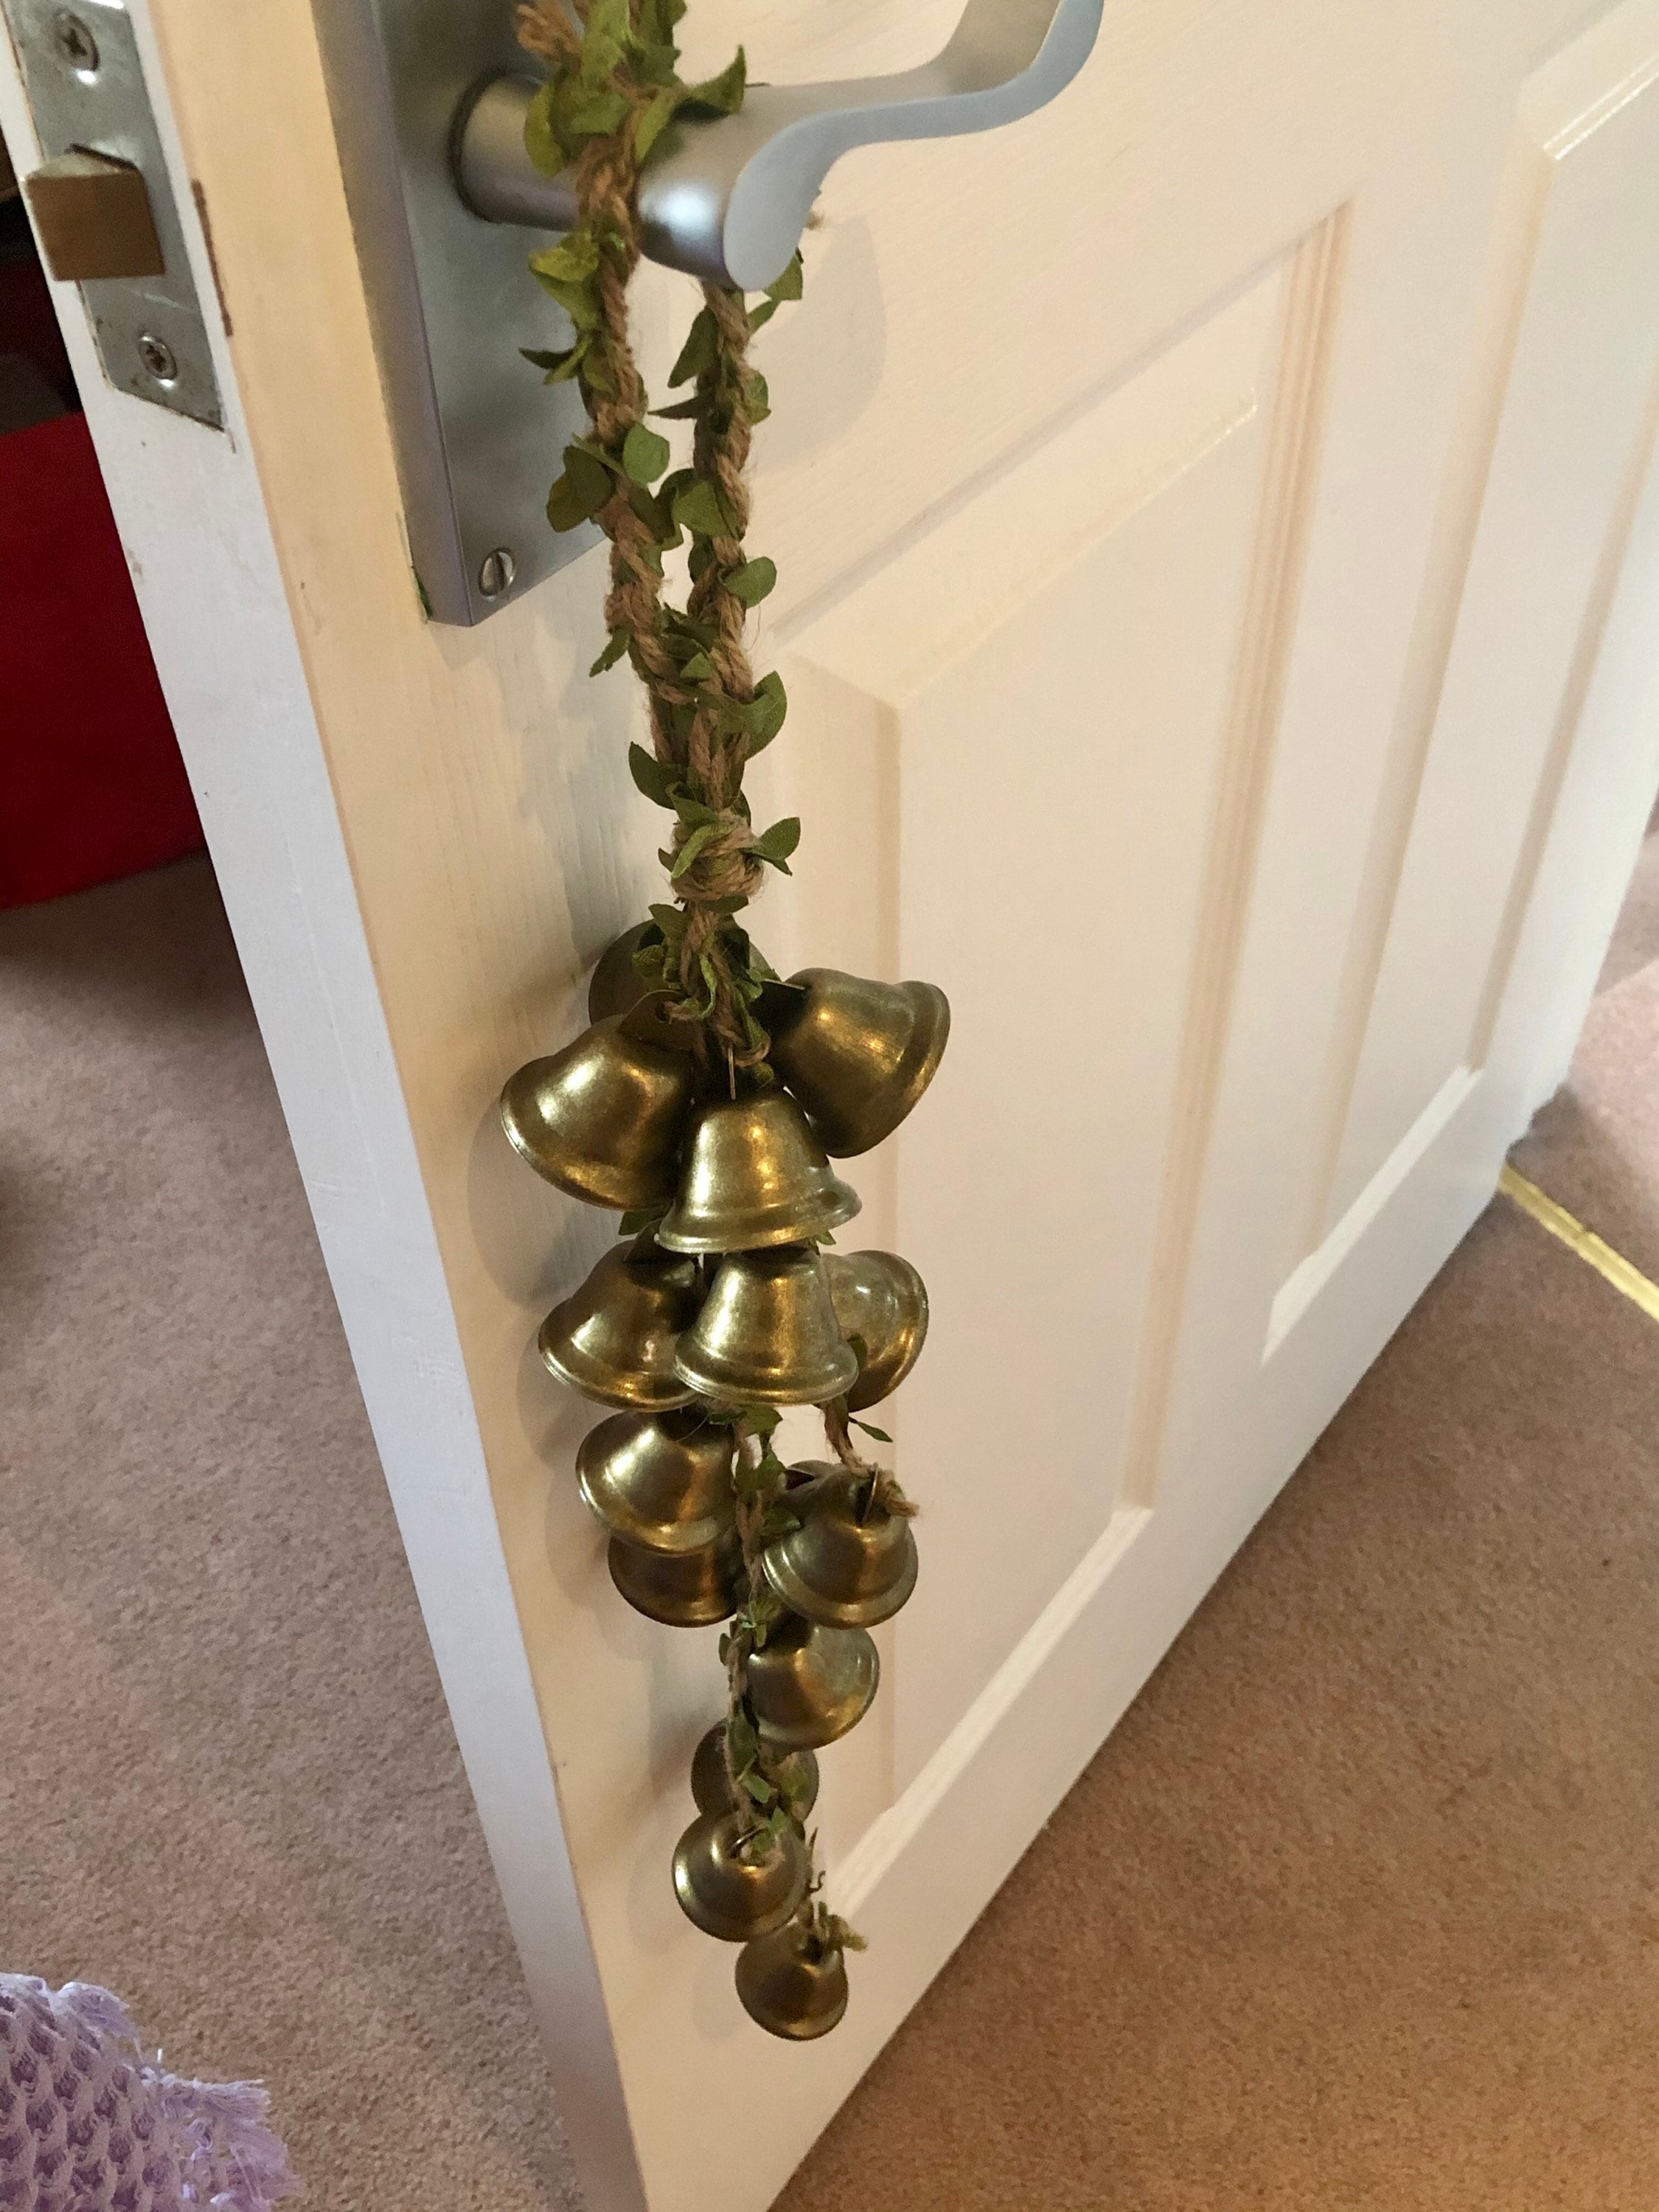 30 Pieces Craft Bells Small Brass Bells for Crafts Vintage Bells with Spring Hooks for Hanging Wind Chimes Making Dog Training Doorbell Christmas